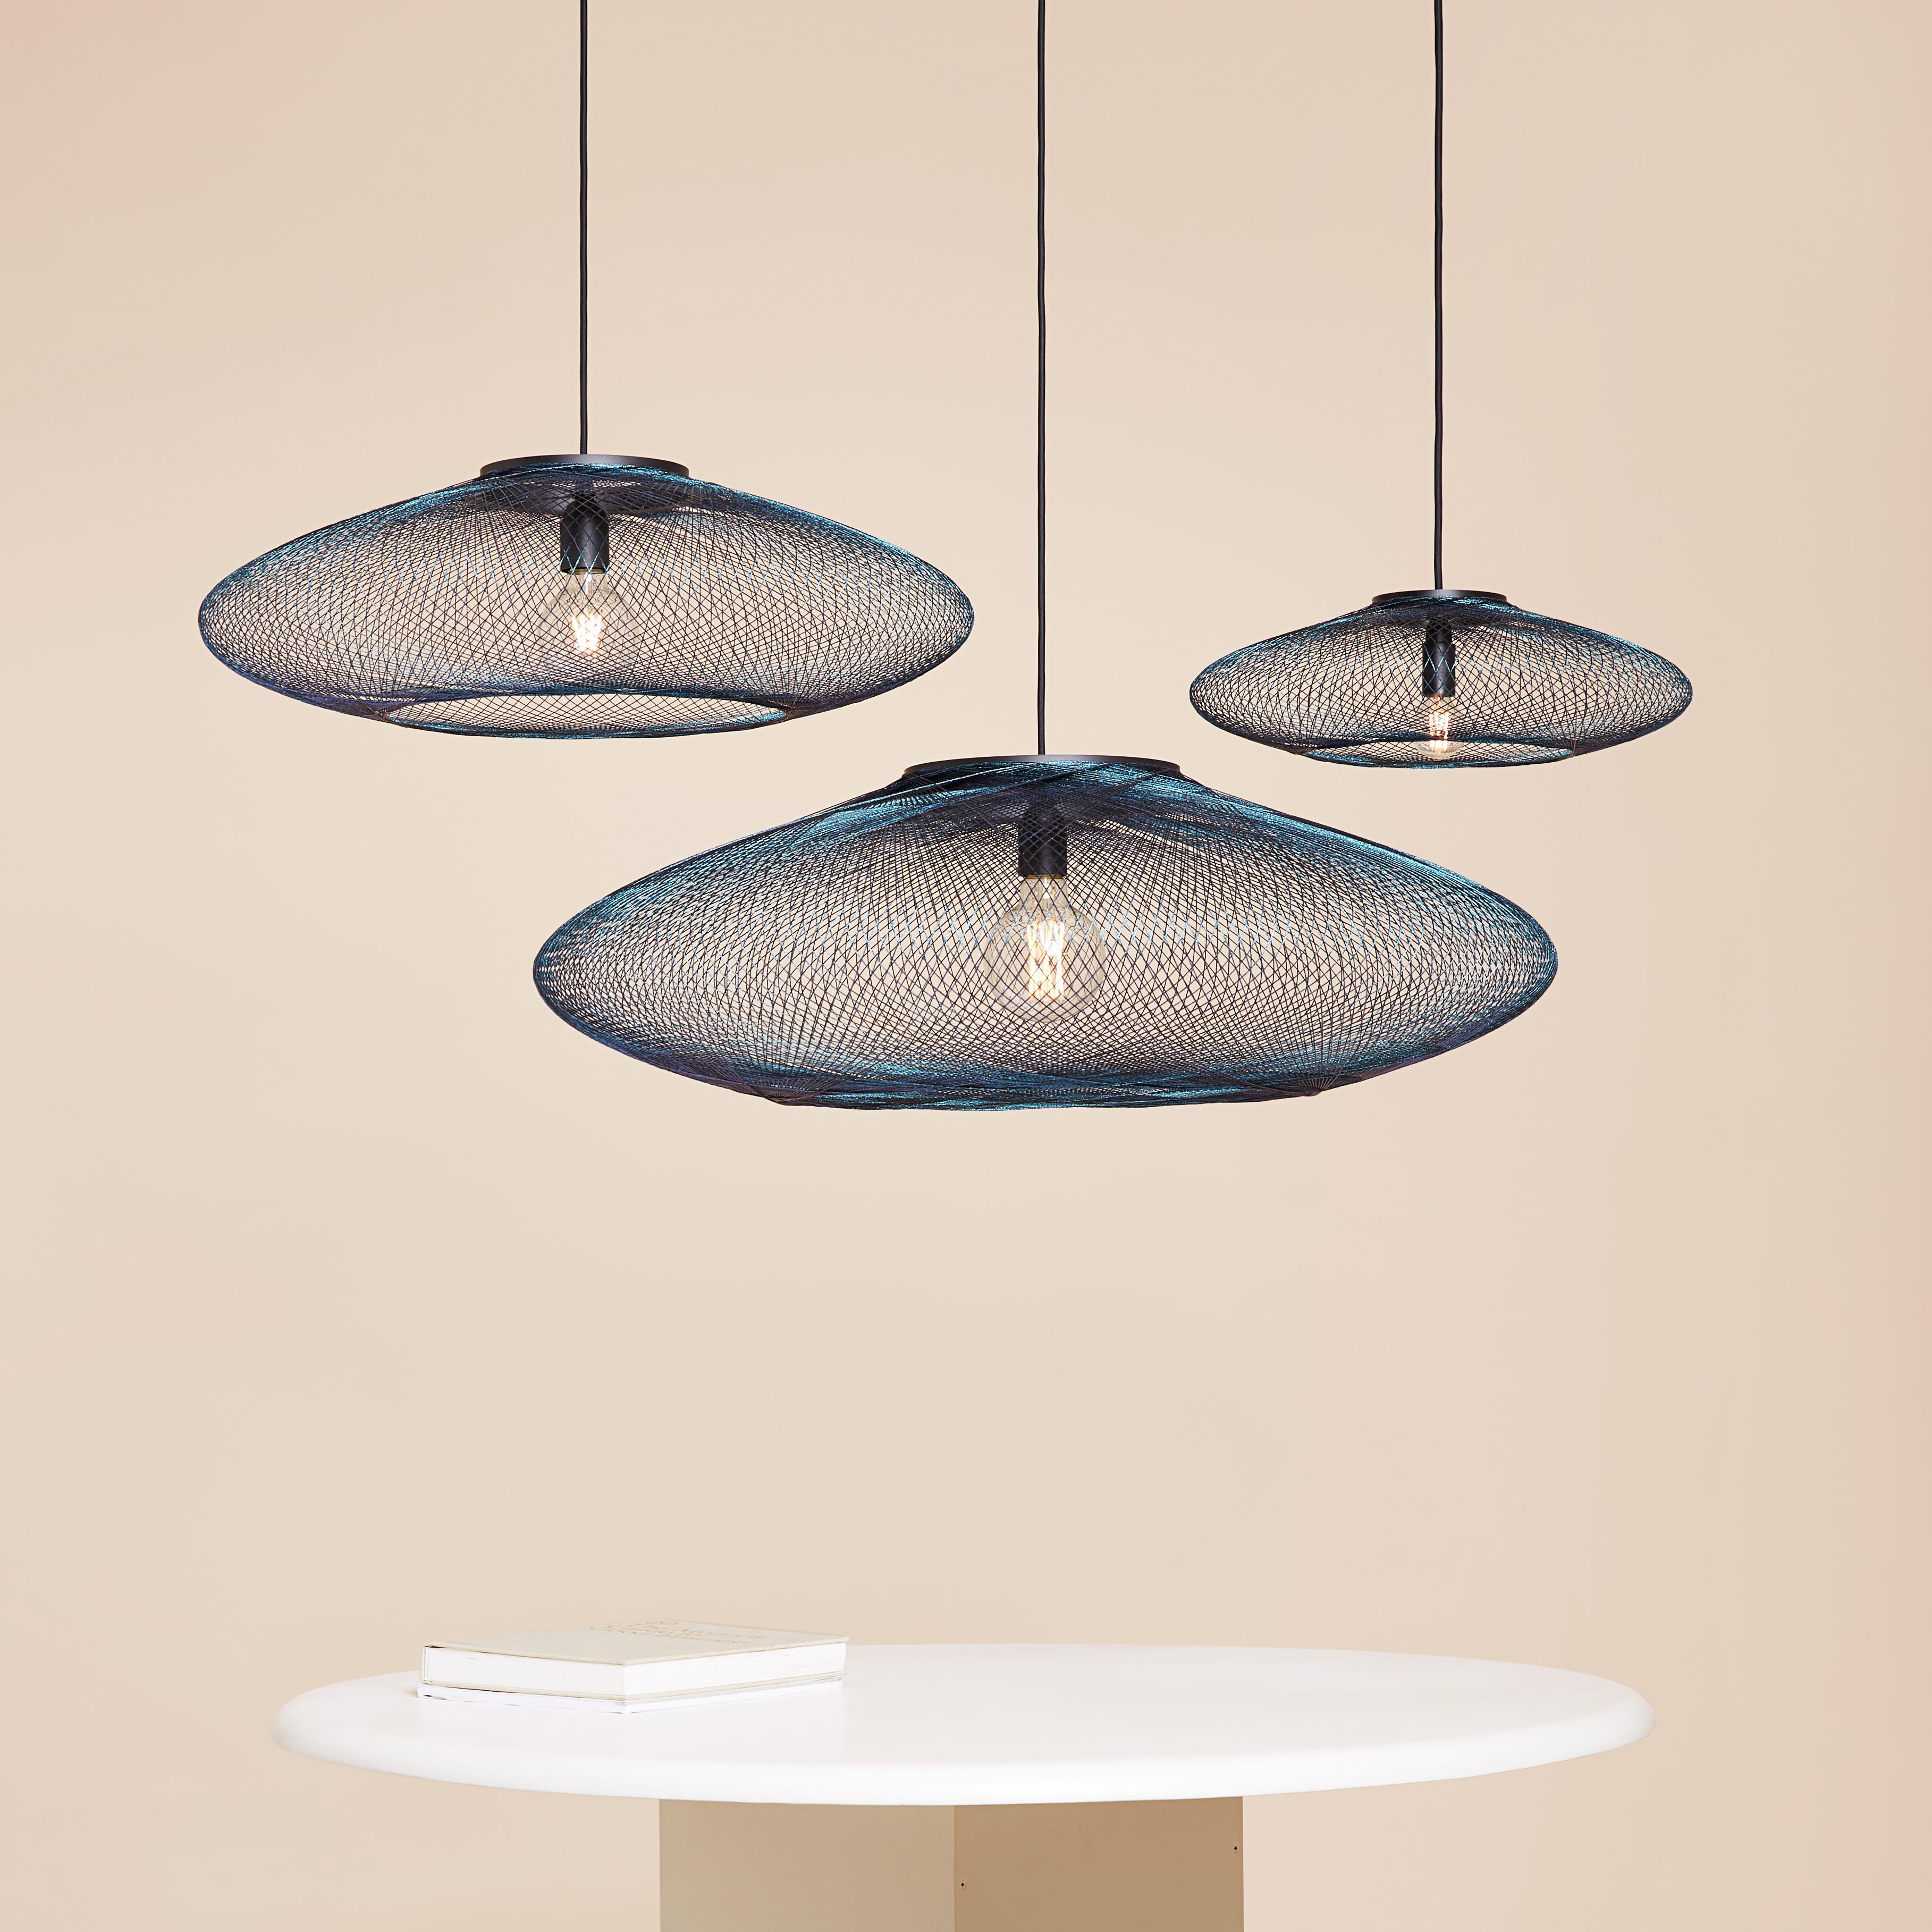 Medium Iridescent UFO pendant lamp by Atelier Robotiq
Dimensions: D 60 x H 18 cm
Materials: Resin-impregnated industrial fiber, black coated stainless steel.
Available in different colors, 3 sizes, and in Full pattern or Open pattern.

All our